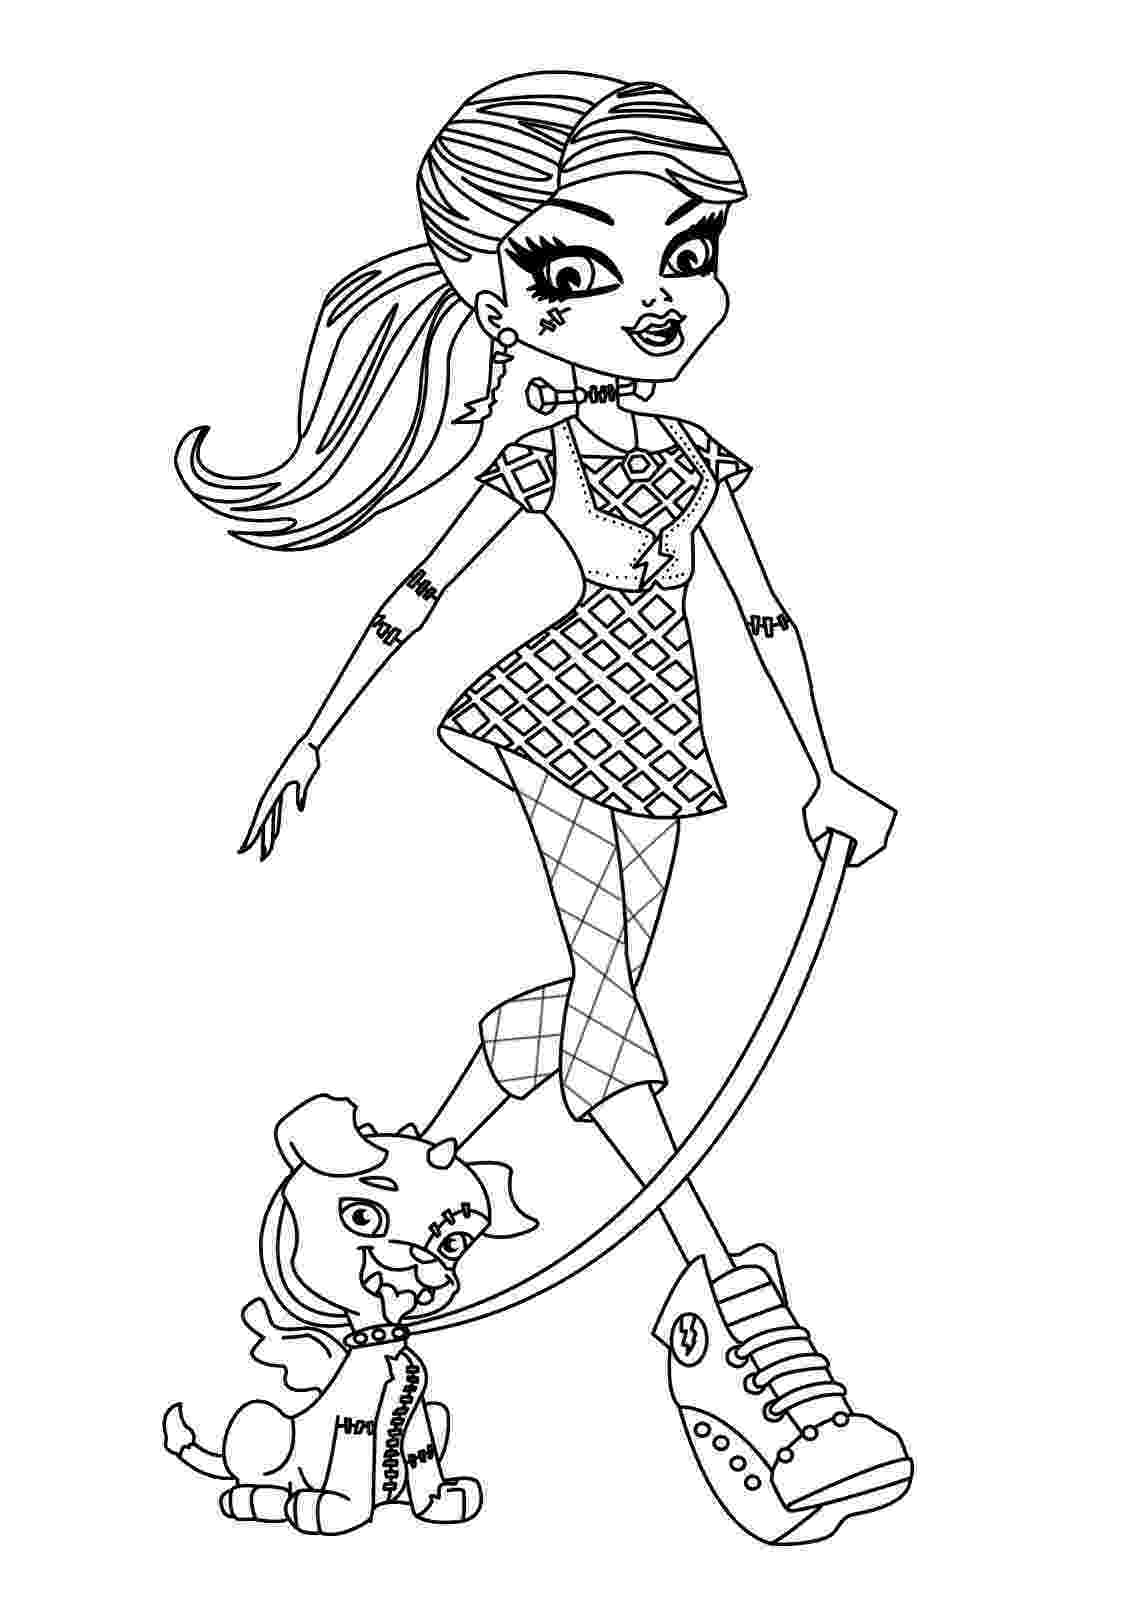 monsters high coloring pages monster high coloring pages free coloring pages pages monsters high coloring 